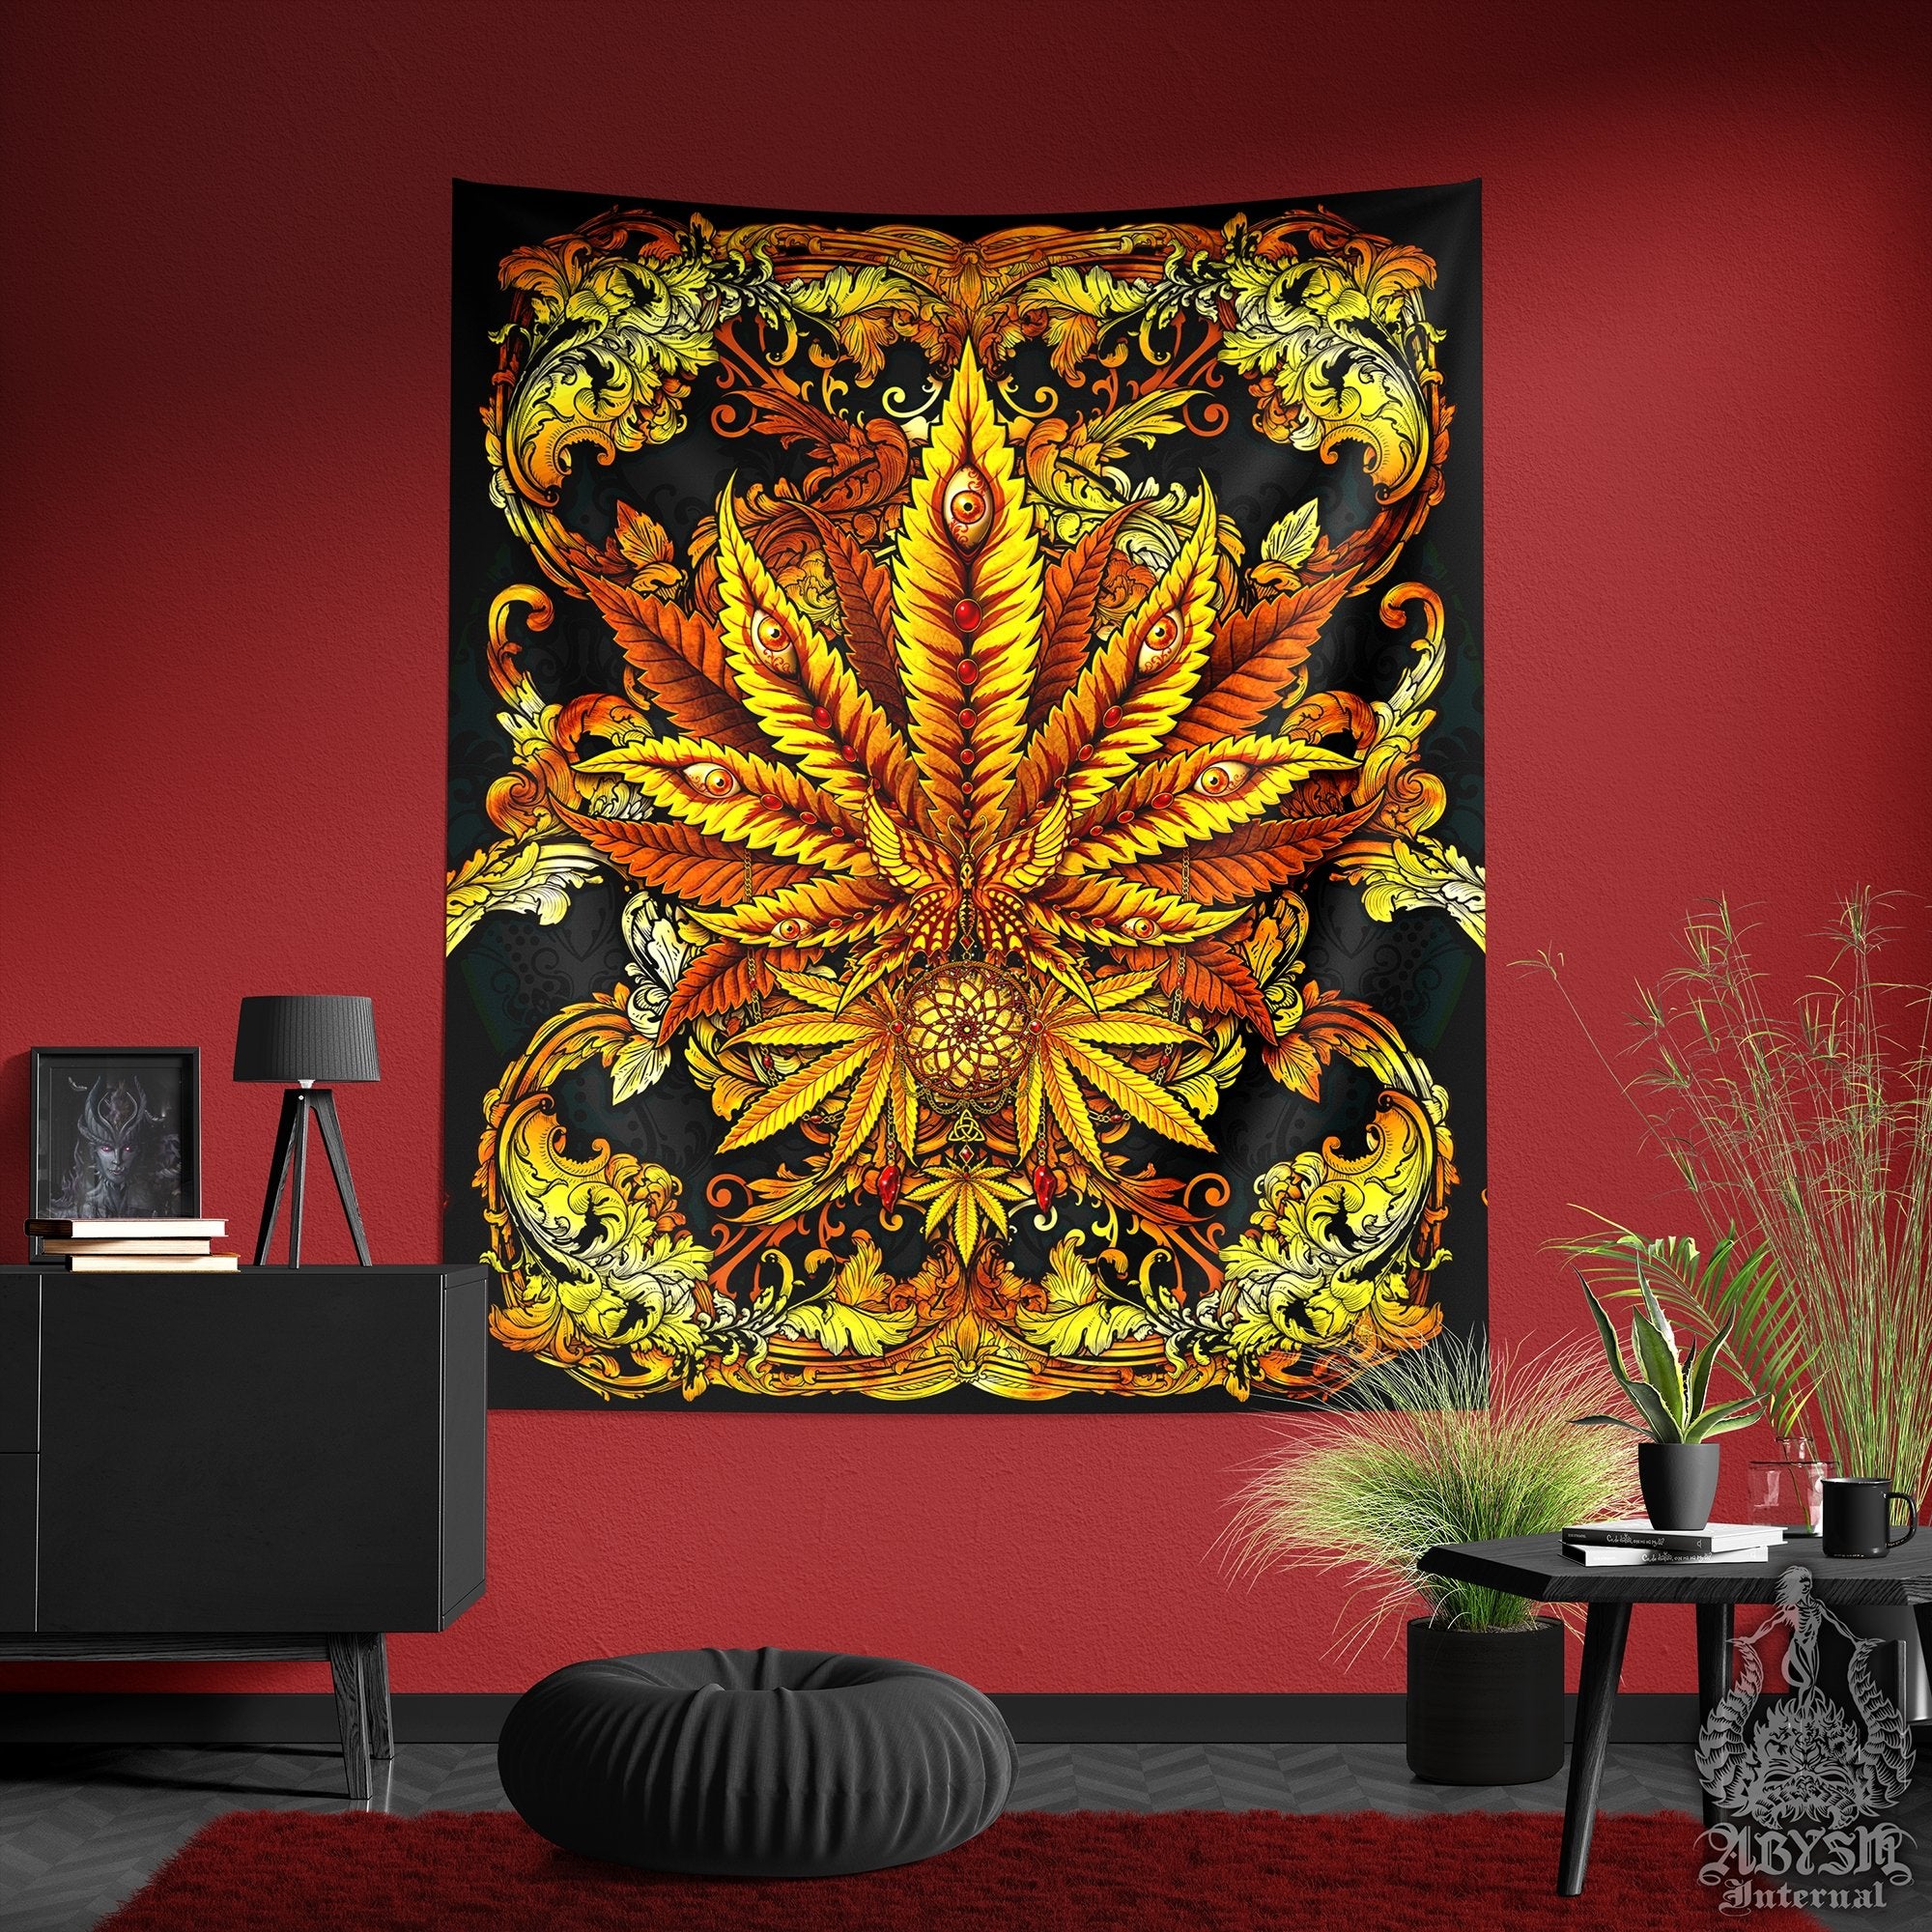 Weed Tapestry, Cannabis Shop Decor, Marijuana Wall Hanging, Indie Home Decor, Eclectic Art Print, 420 Gift - Gold - Abysm Internal